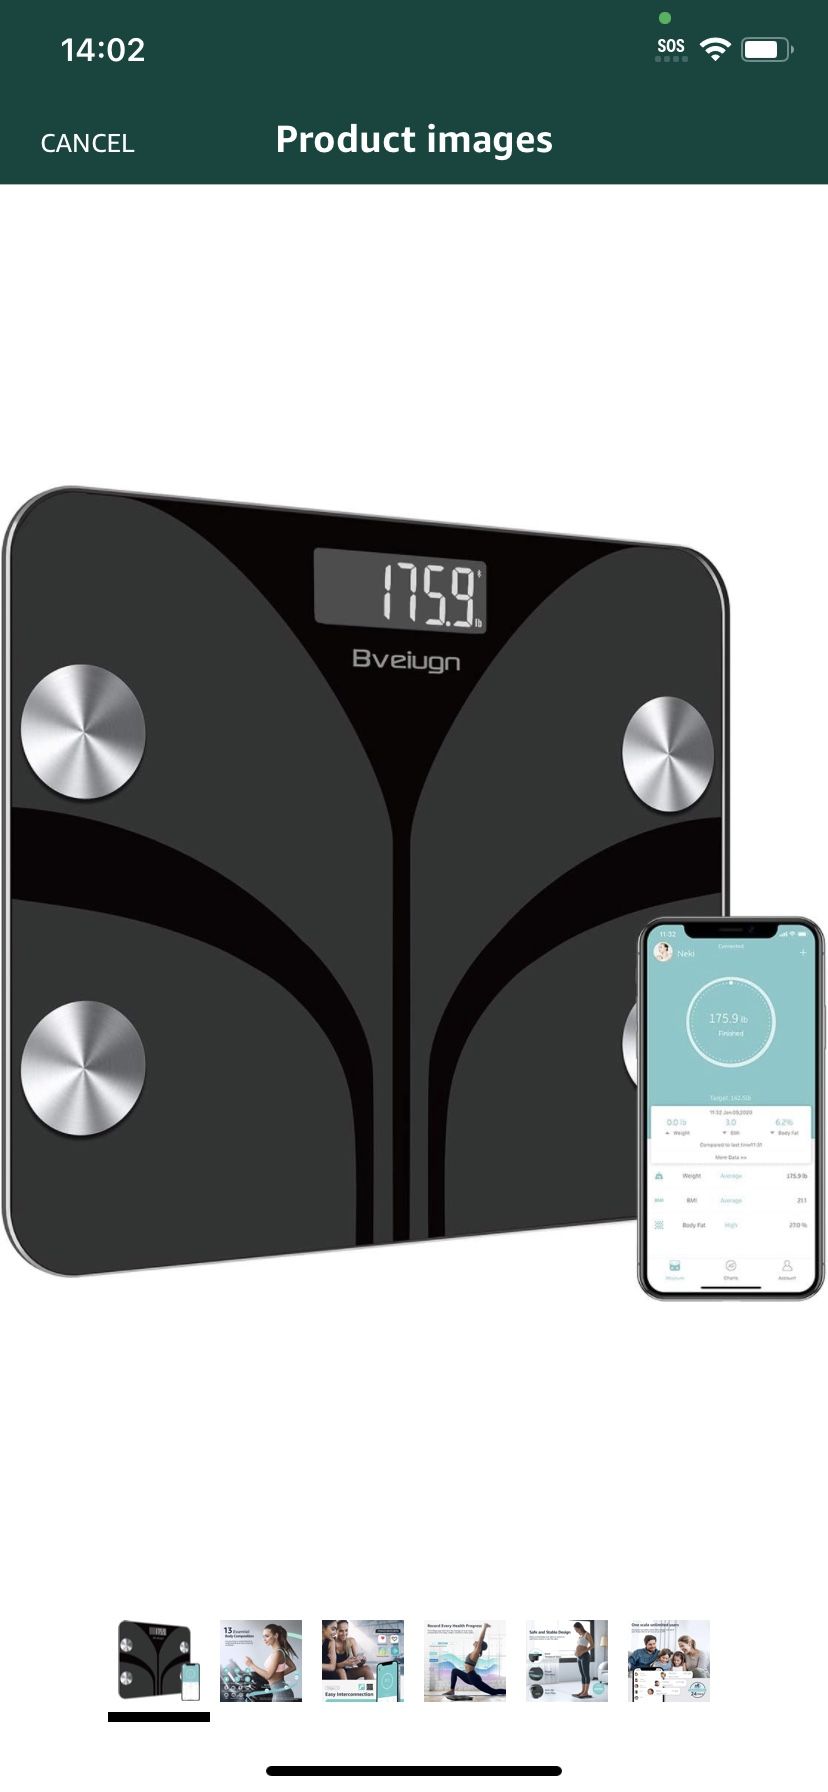 Smart Scale for Body Weight and Fat Percentage, RunSTAR High Accuracy Digital Bathroom Scale FSA or HSA Eligible with LED Display for BMI 13 Body Comp